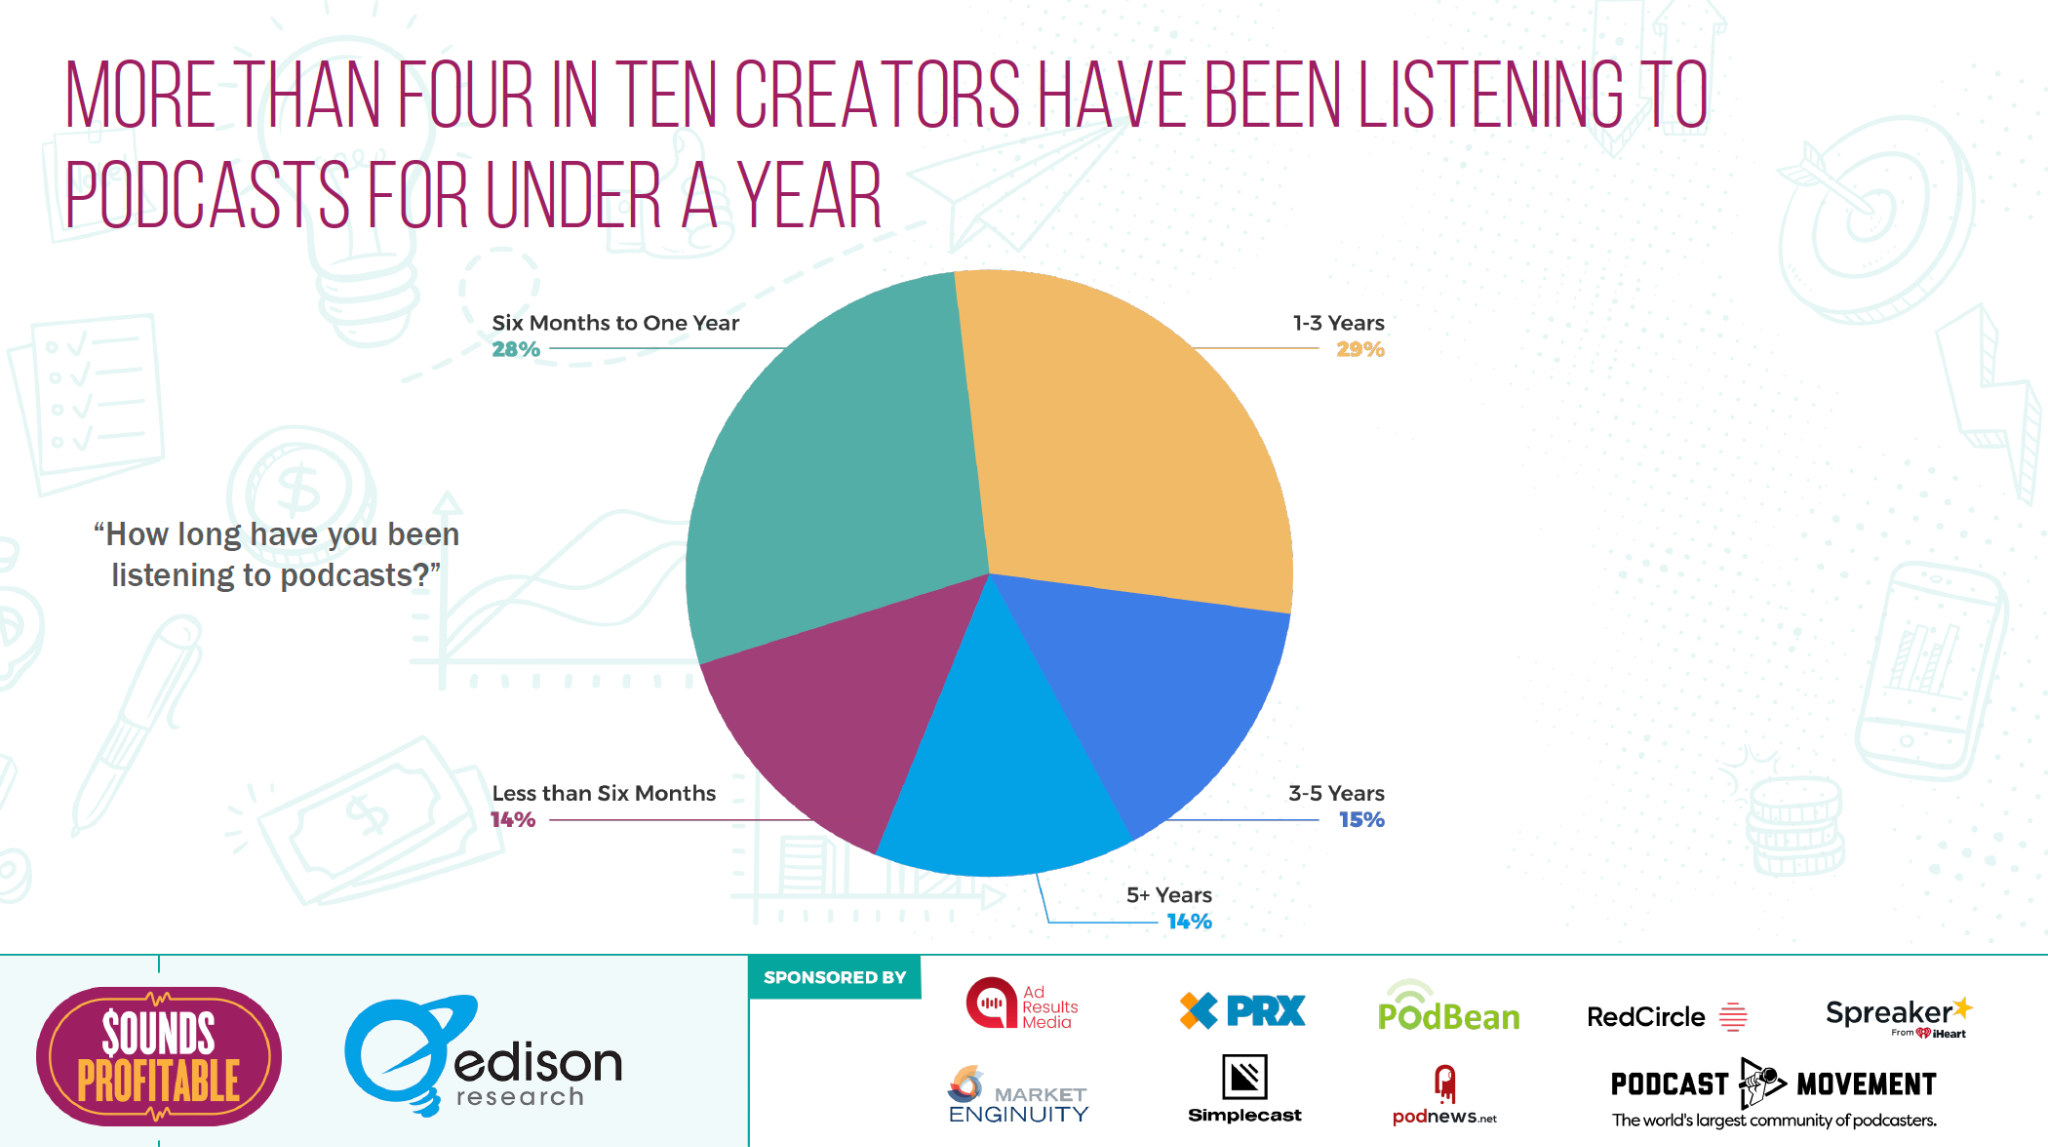 More than 4 in ten creators have been listening to podcasts for under a year